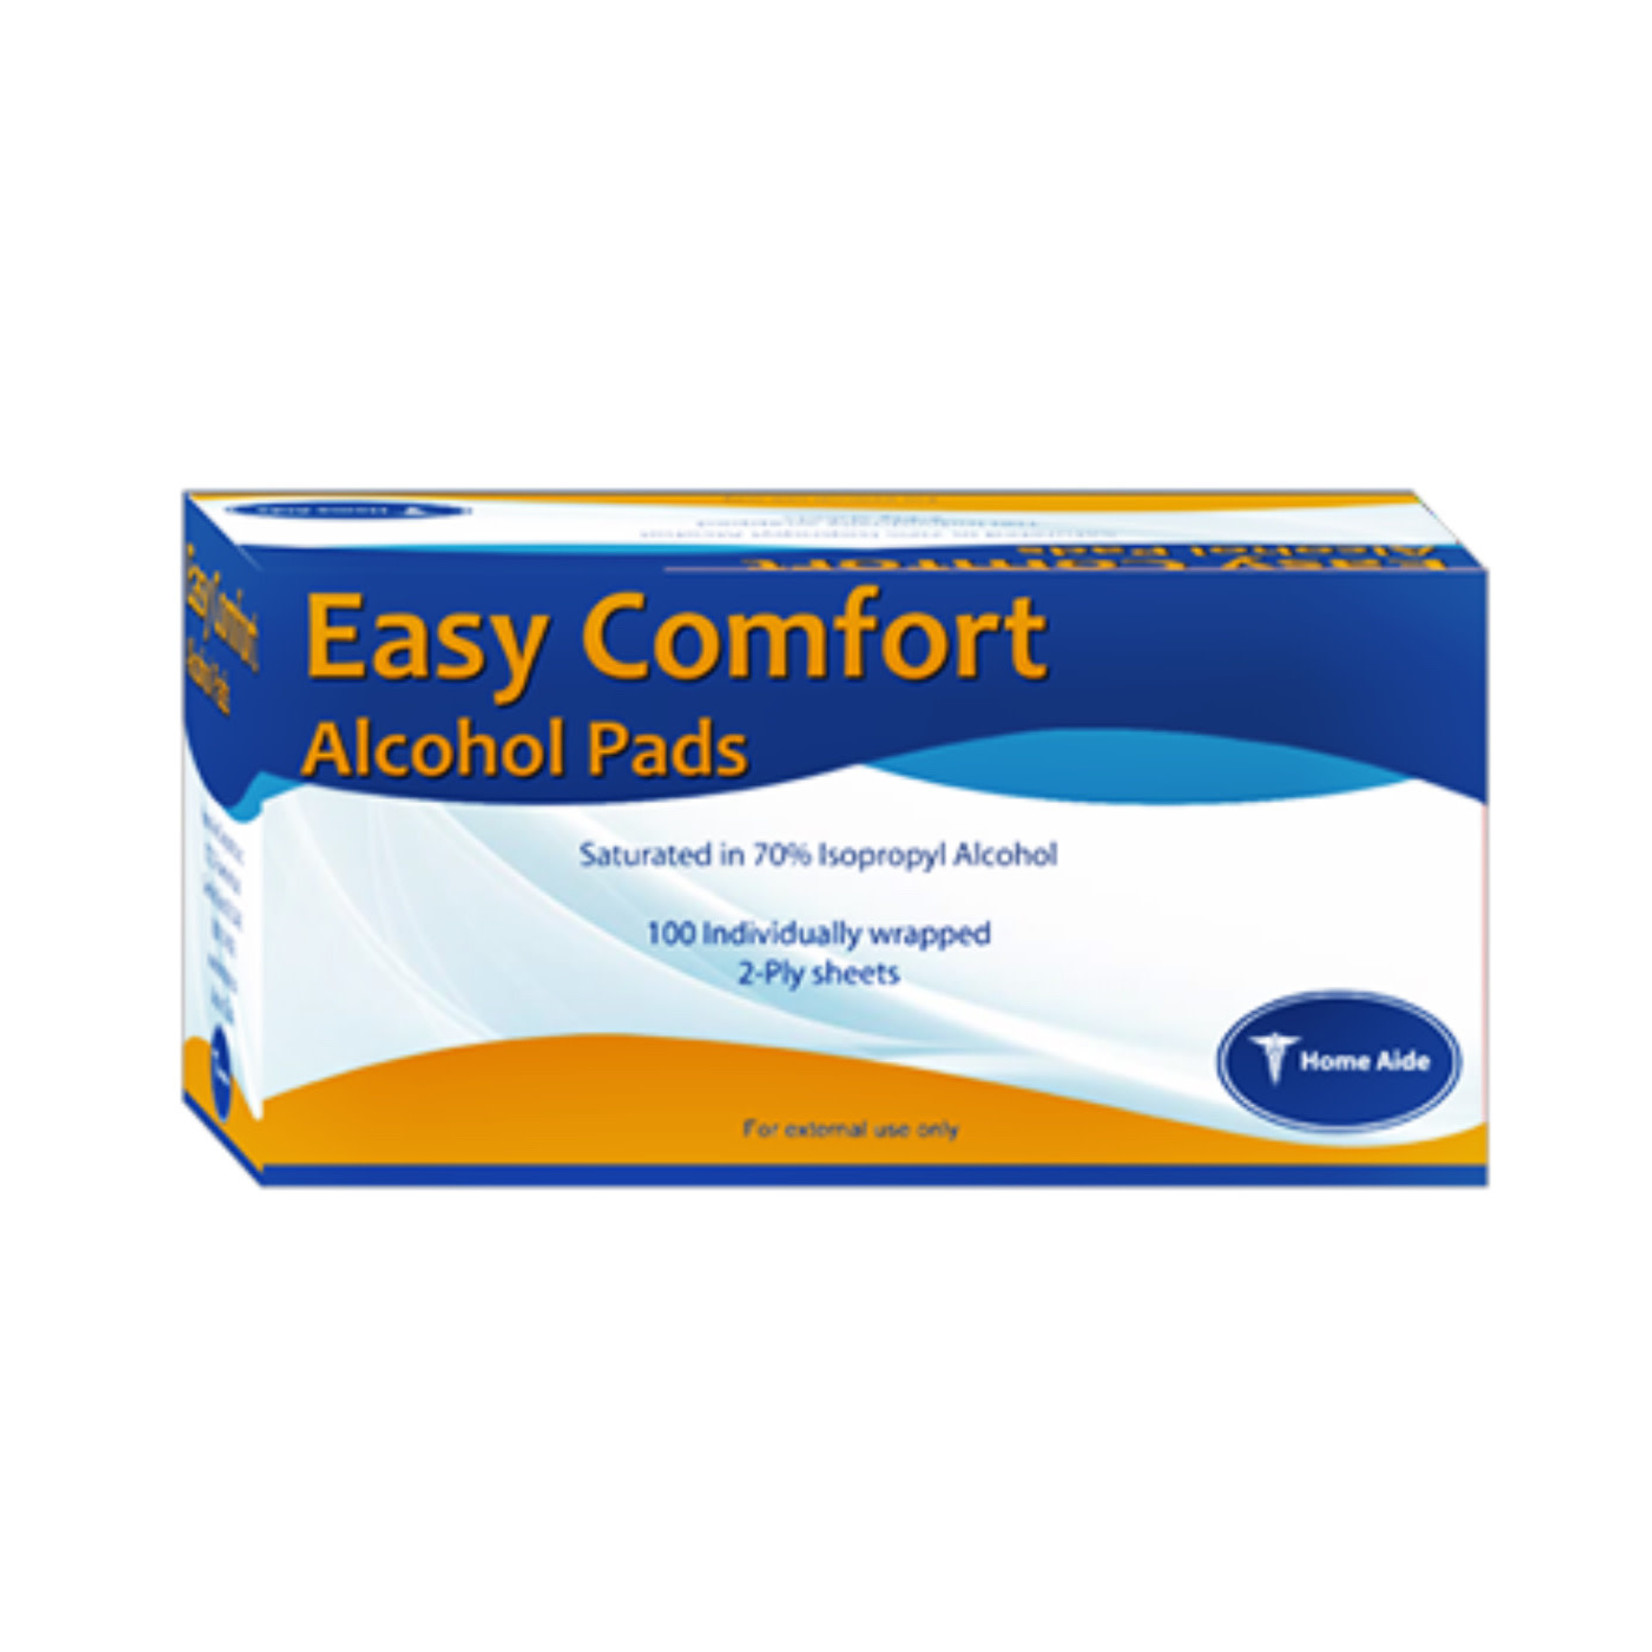 Easy Comfort Alcohol Pads, 100/case - NDC# 91237-0001-28